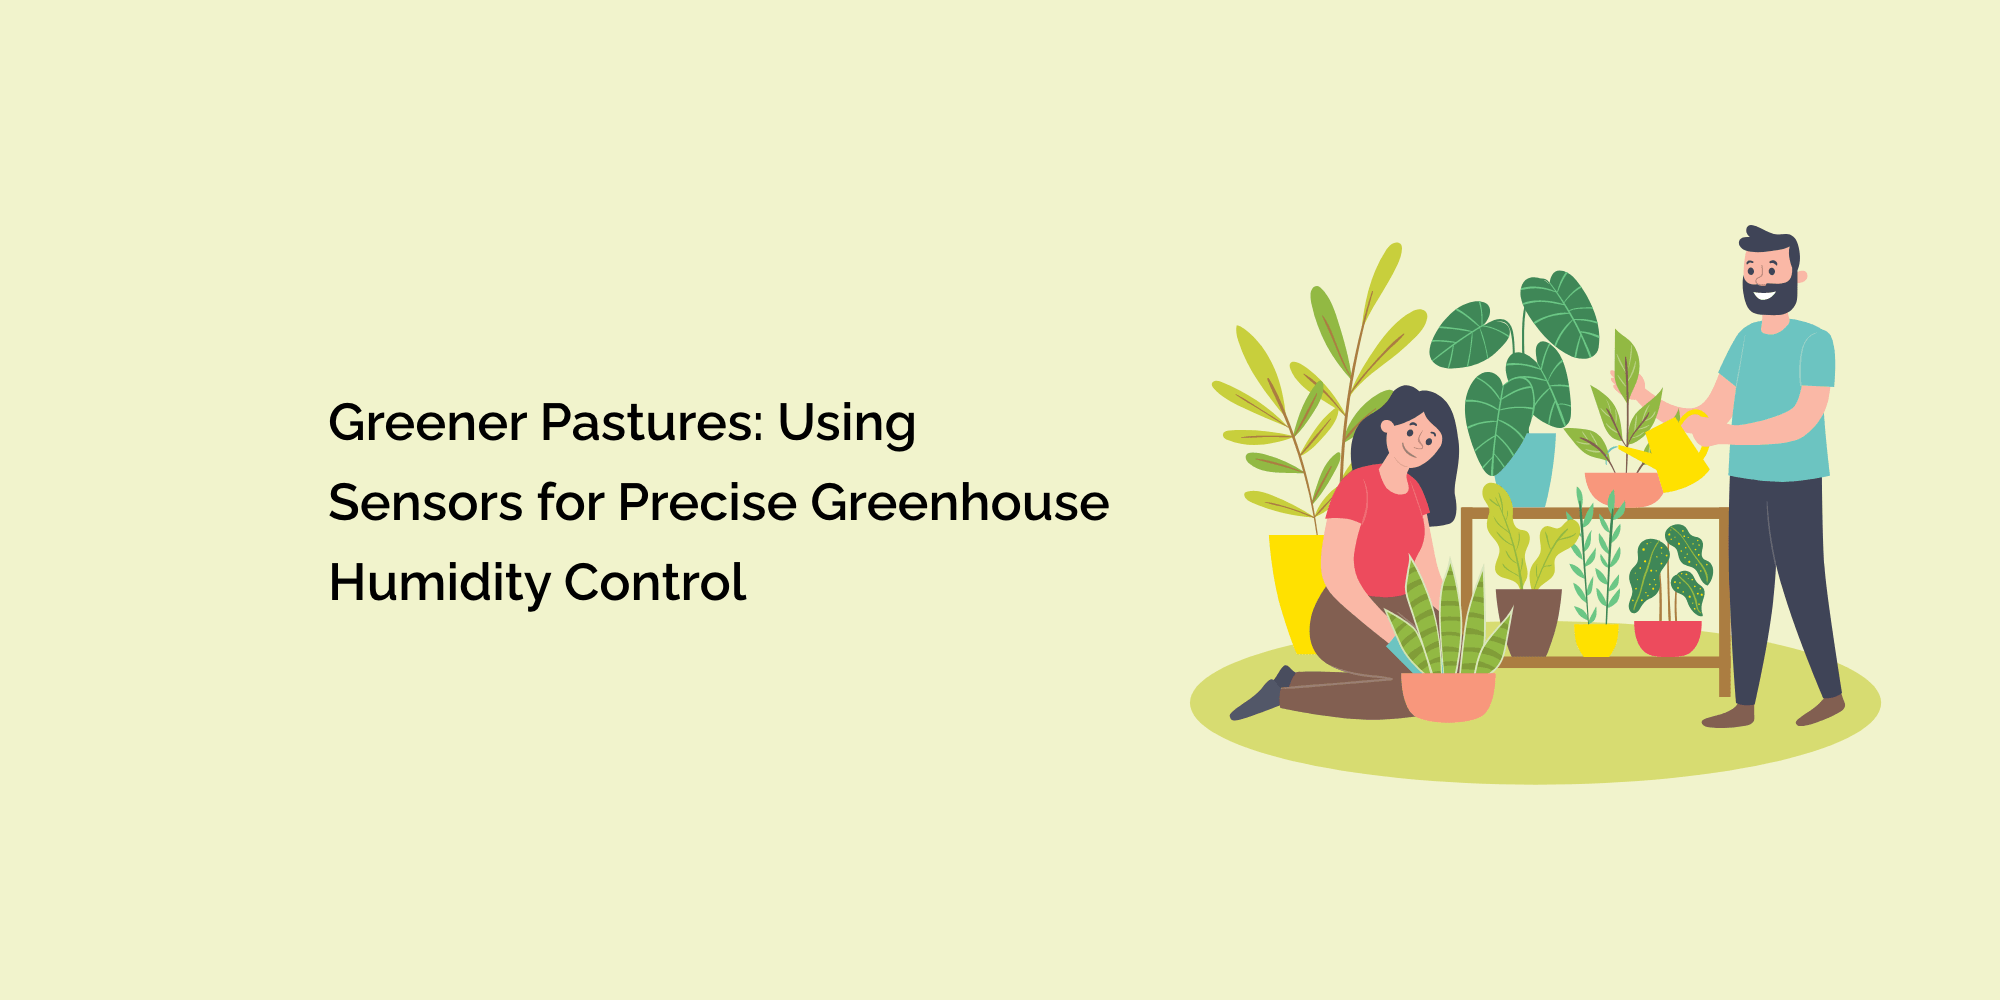 Greener Pastures: Using Sensors for Precise Greenhouse Humidity Control